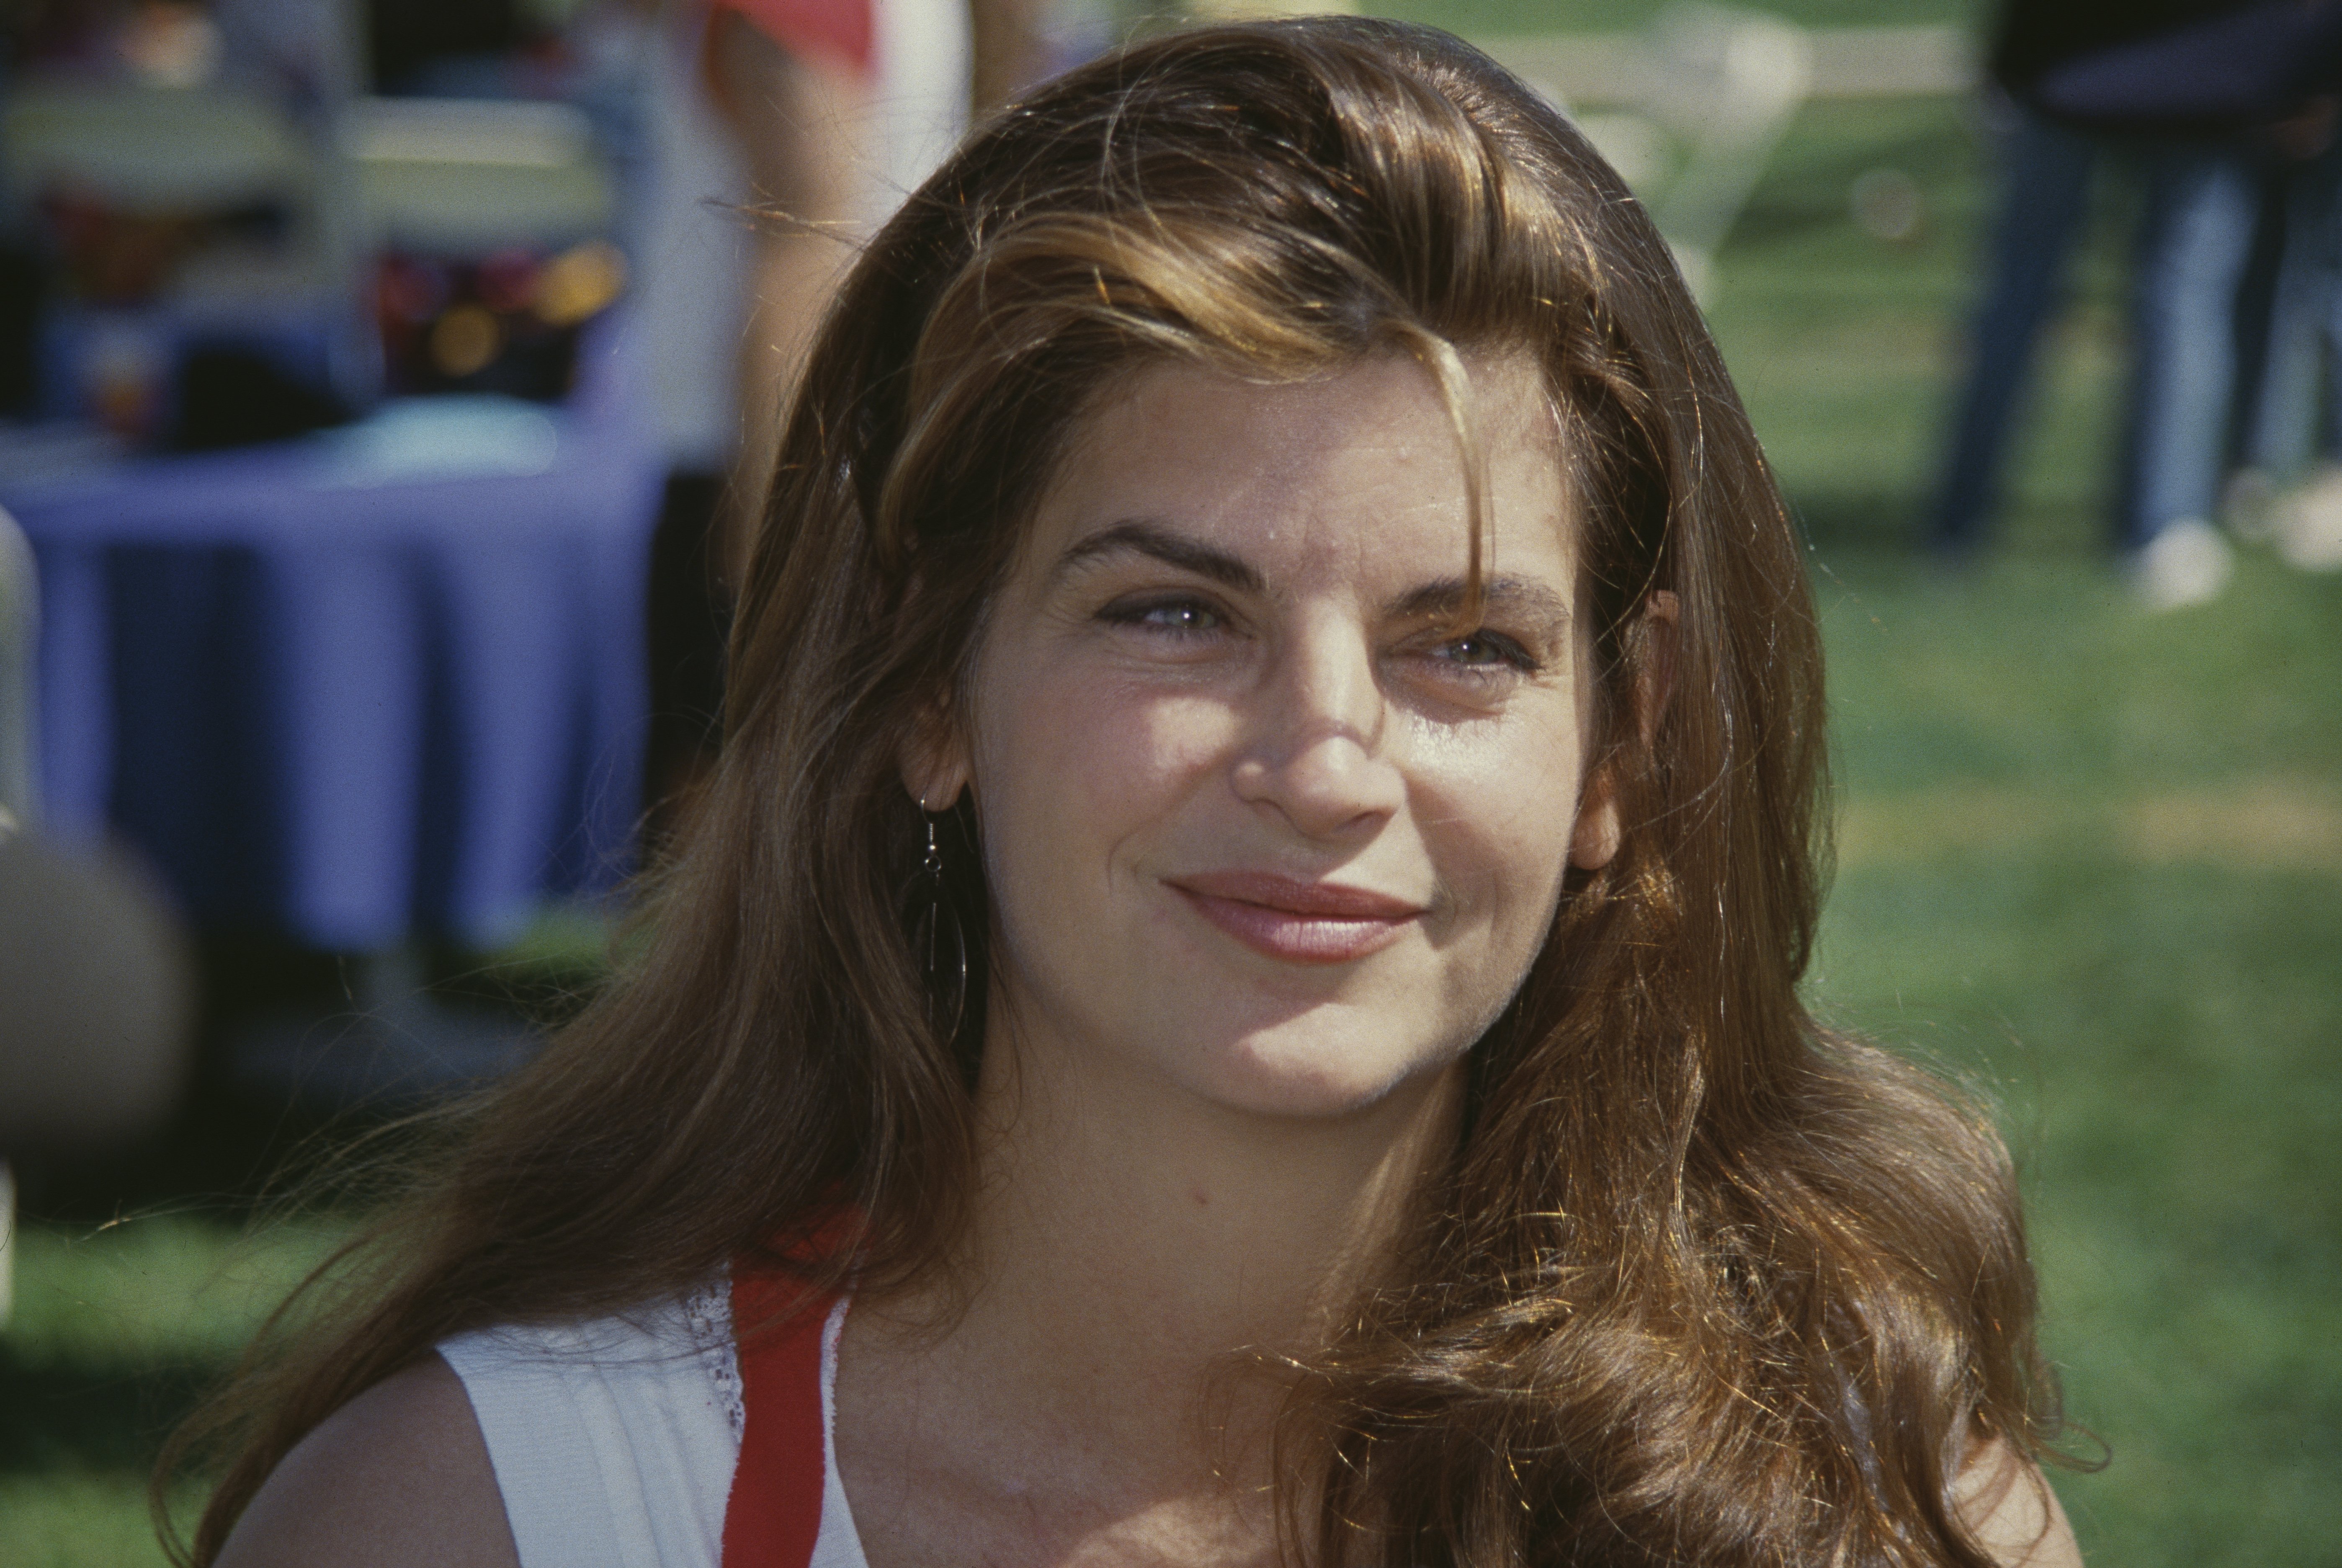 Kirstie Alley in Los Angeles in 1991. | Source: Getty Images